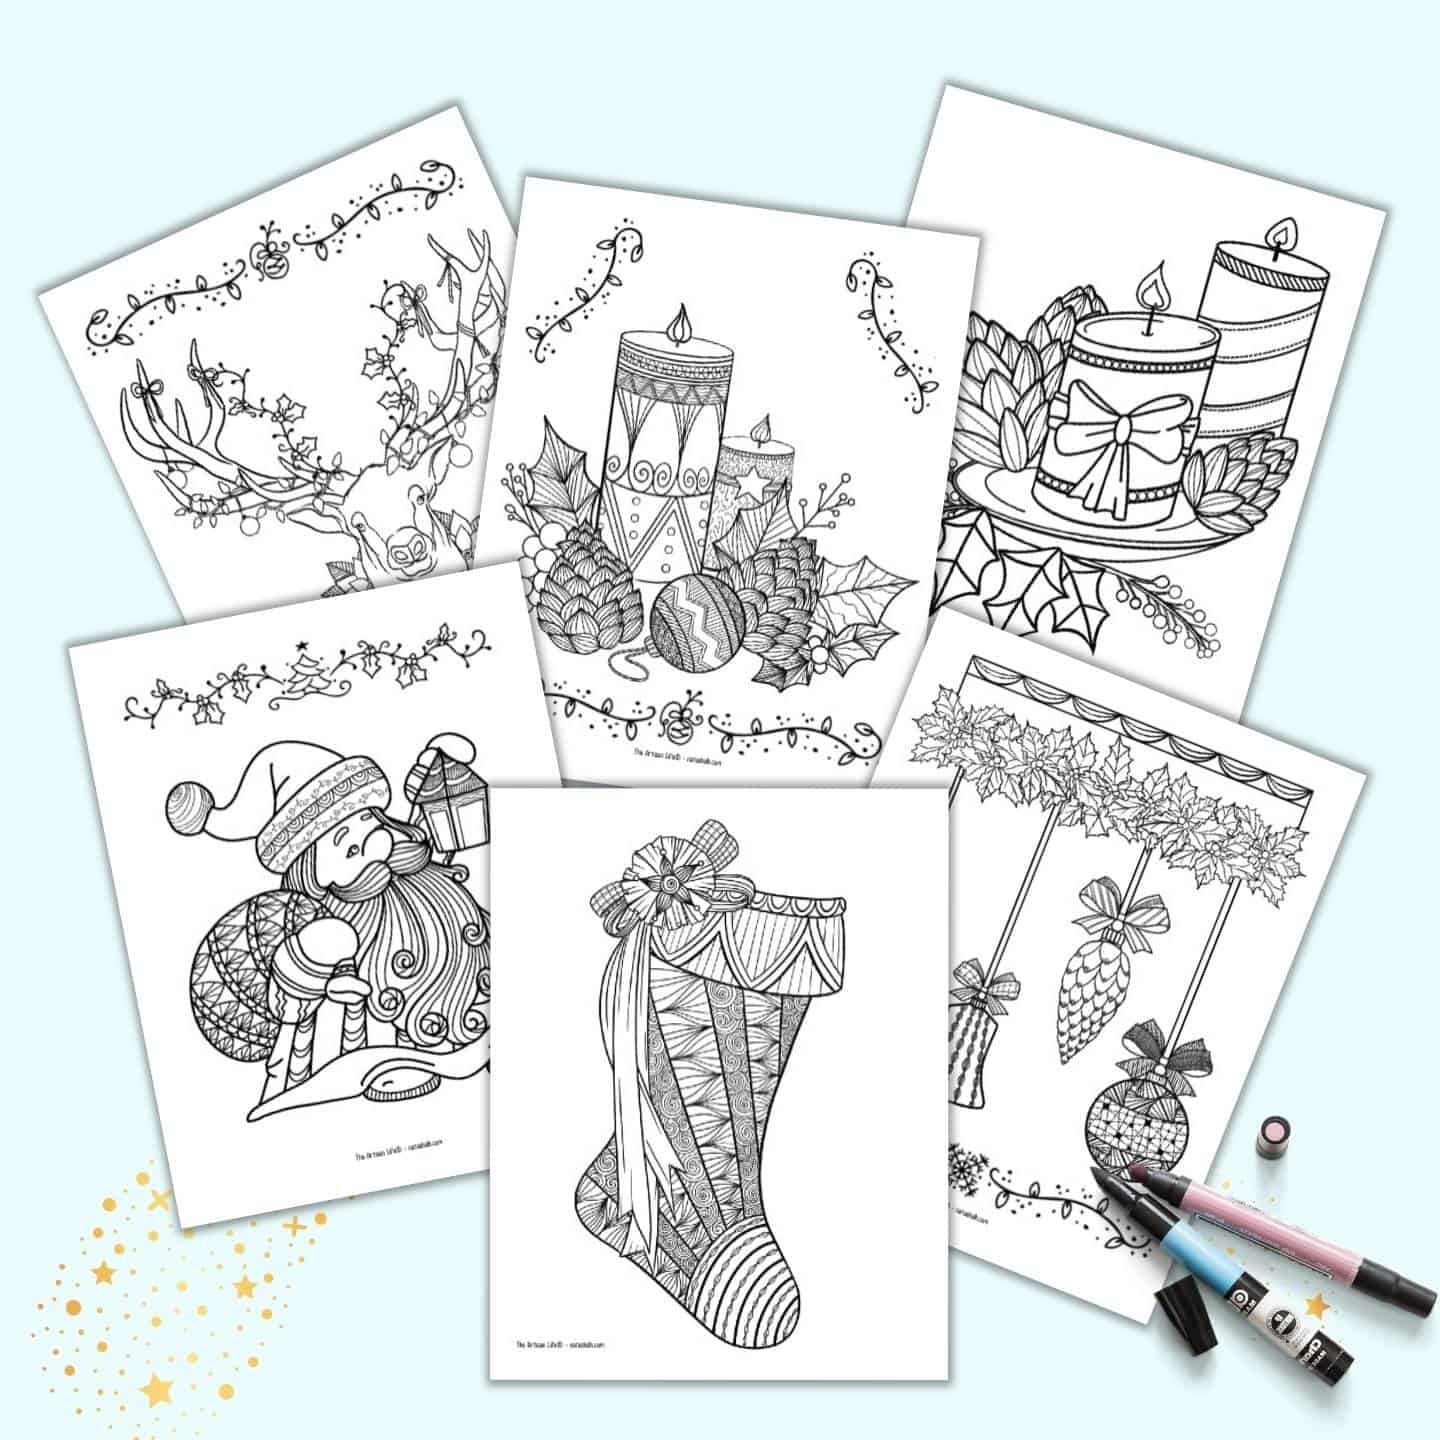 20+ Free Printable Christmas Coloring Pages for Adults   The ...